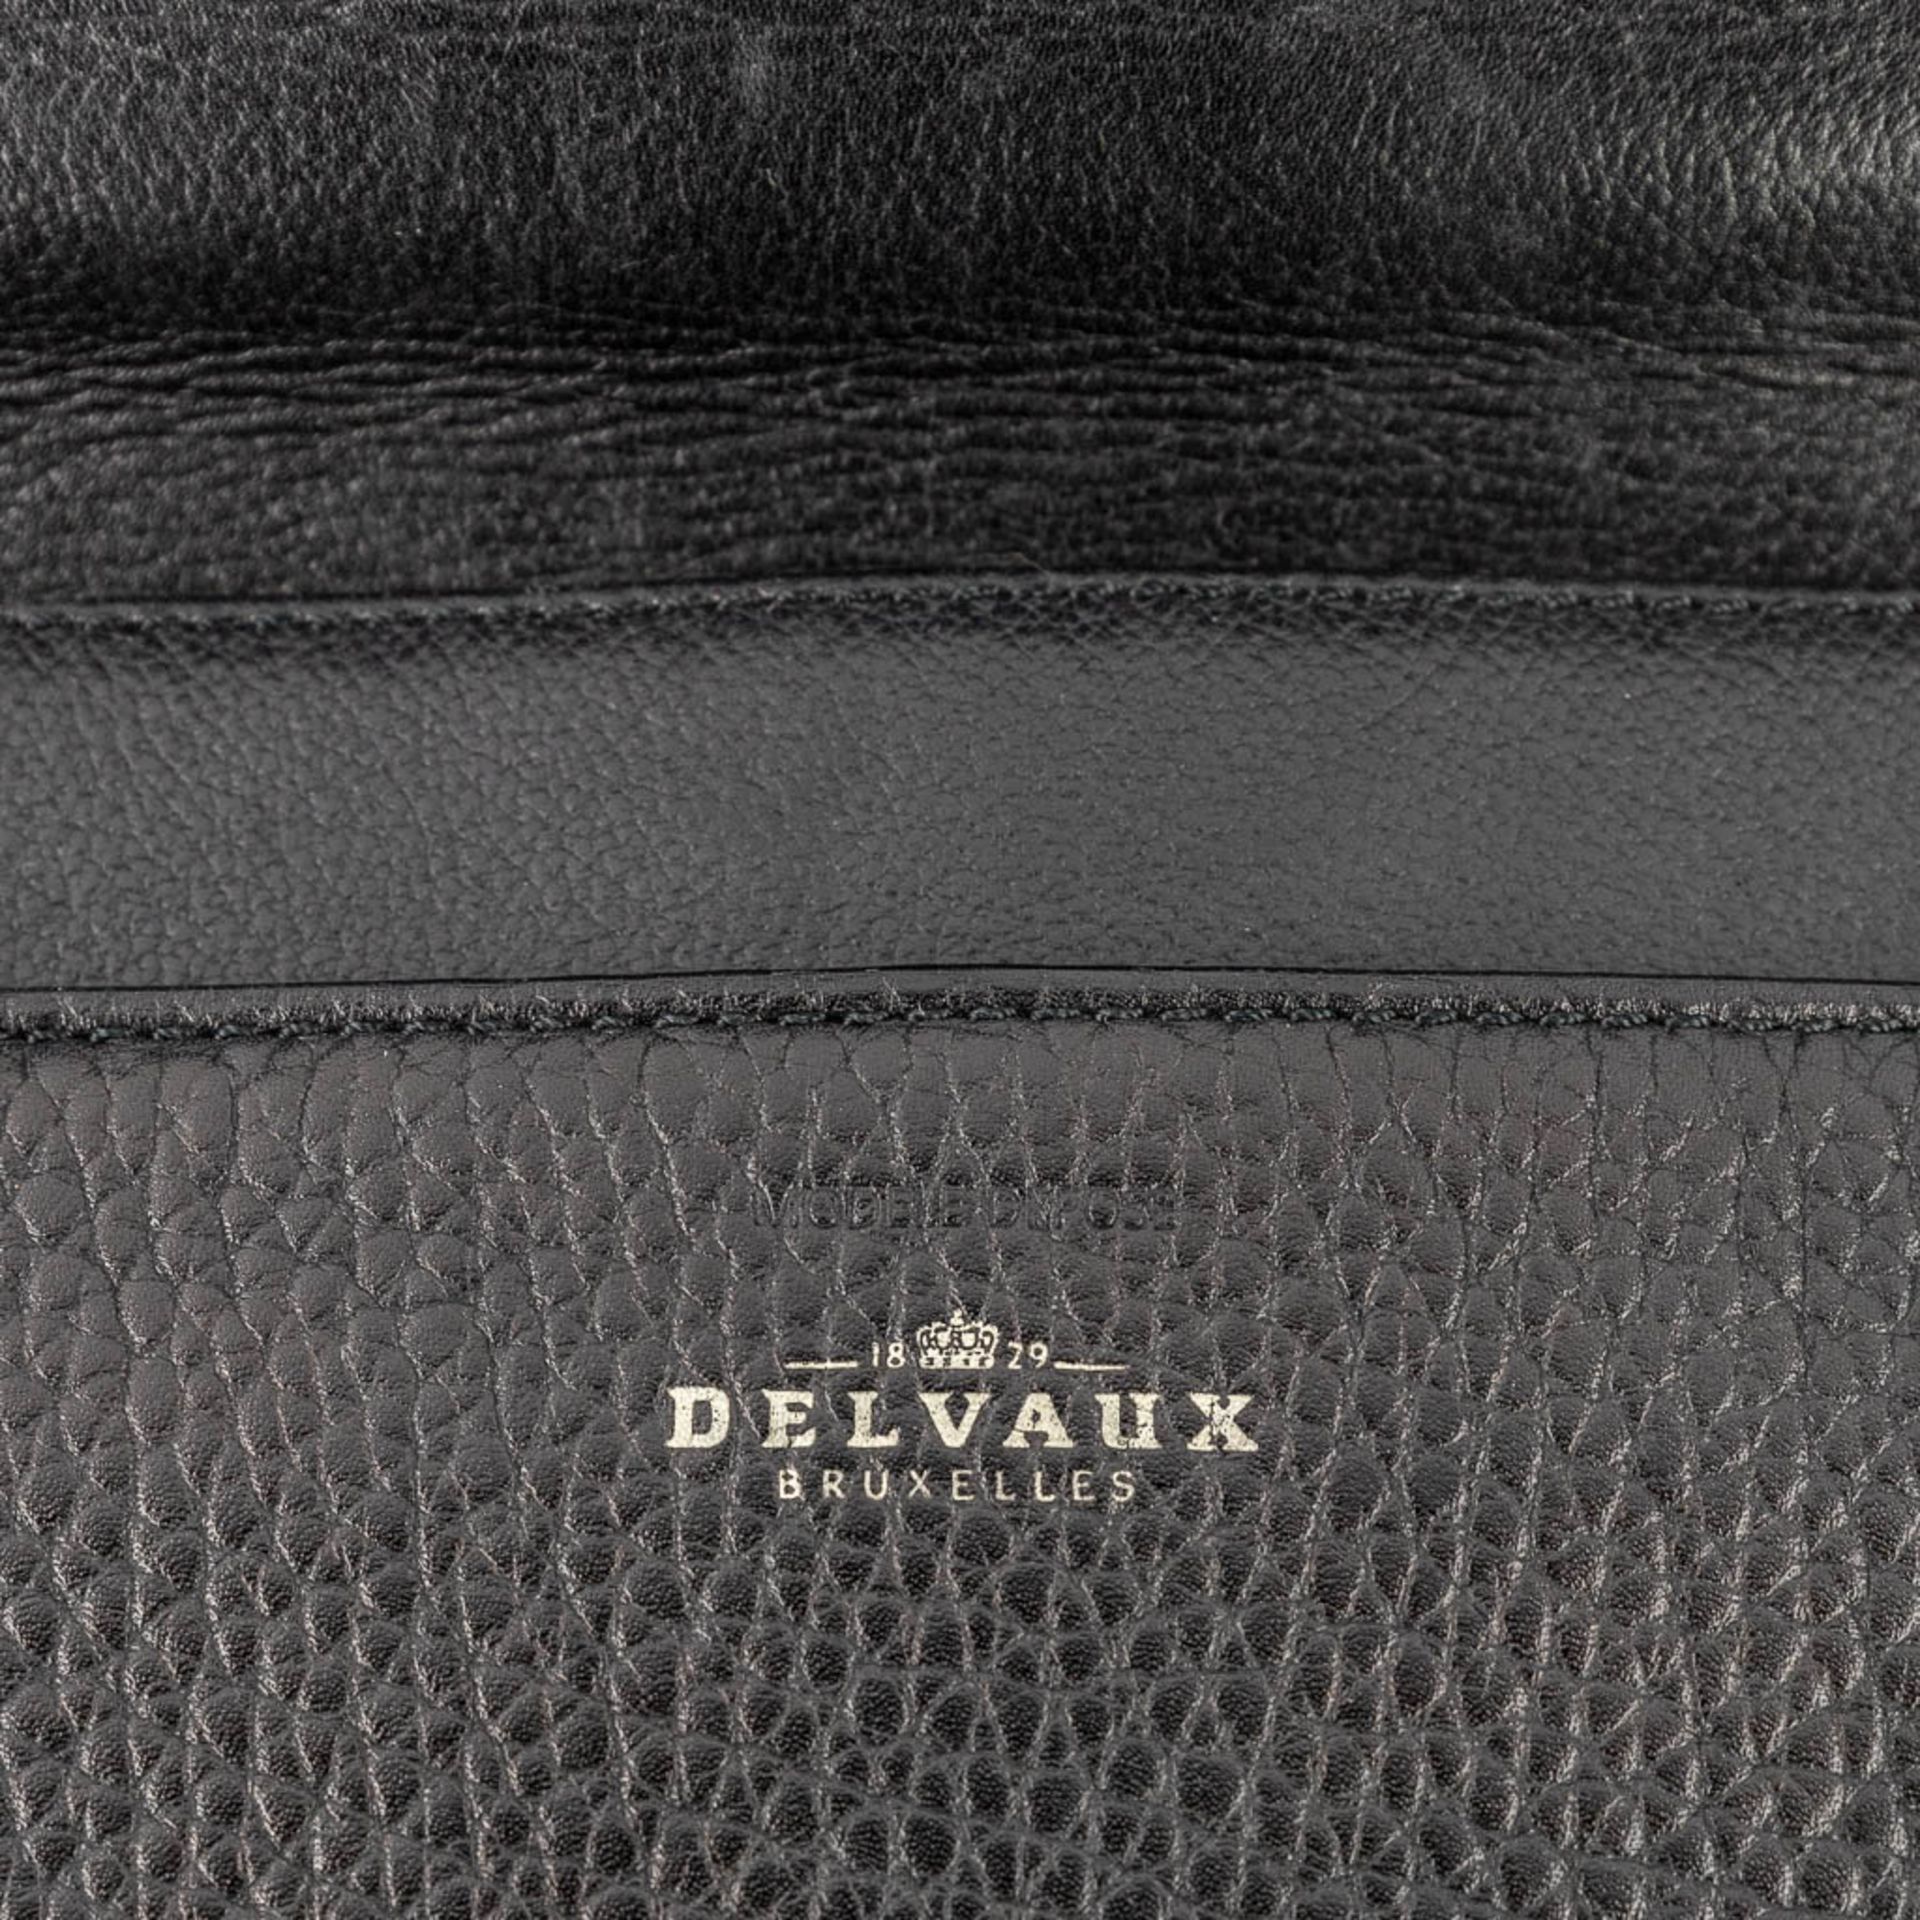 Delvaux, a suitcase made of black leather with gold-plated elements. (W:39 x H:33 cm) - Image 12 of 16